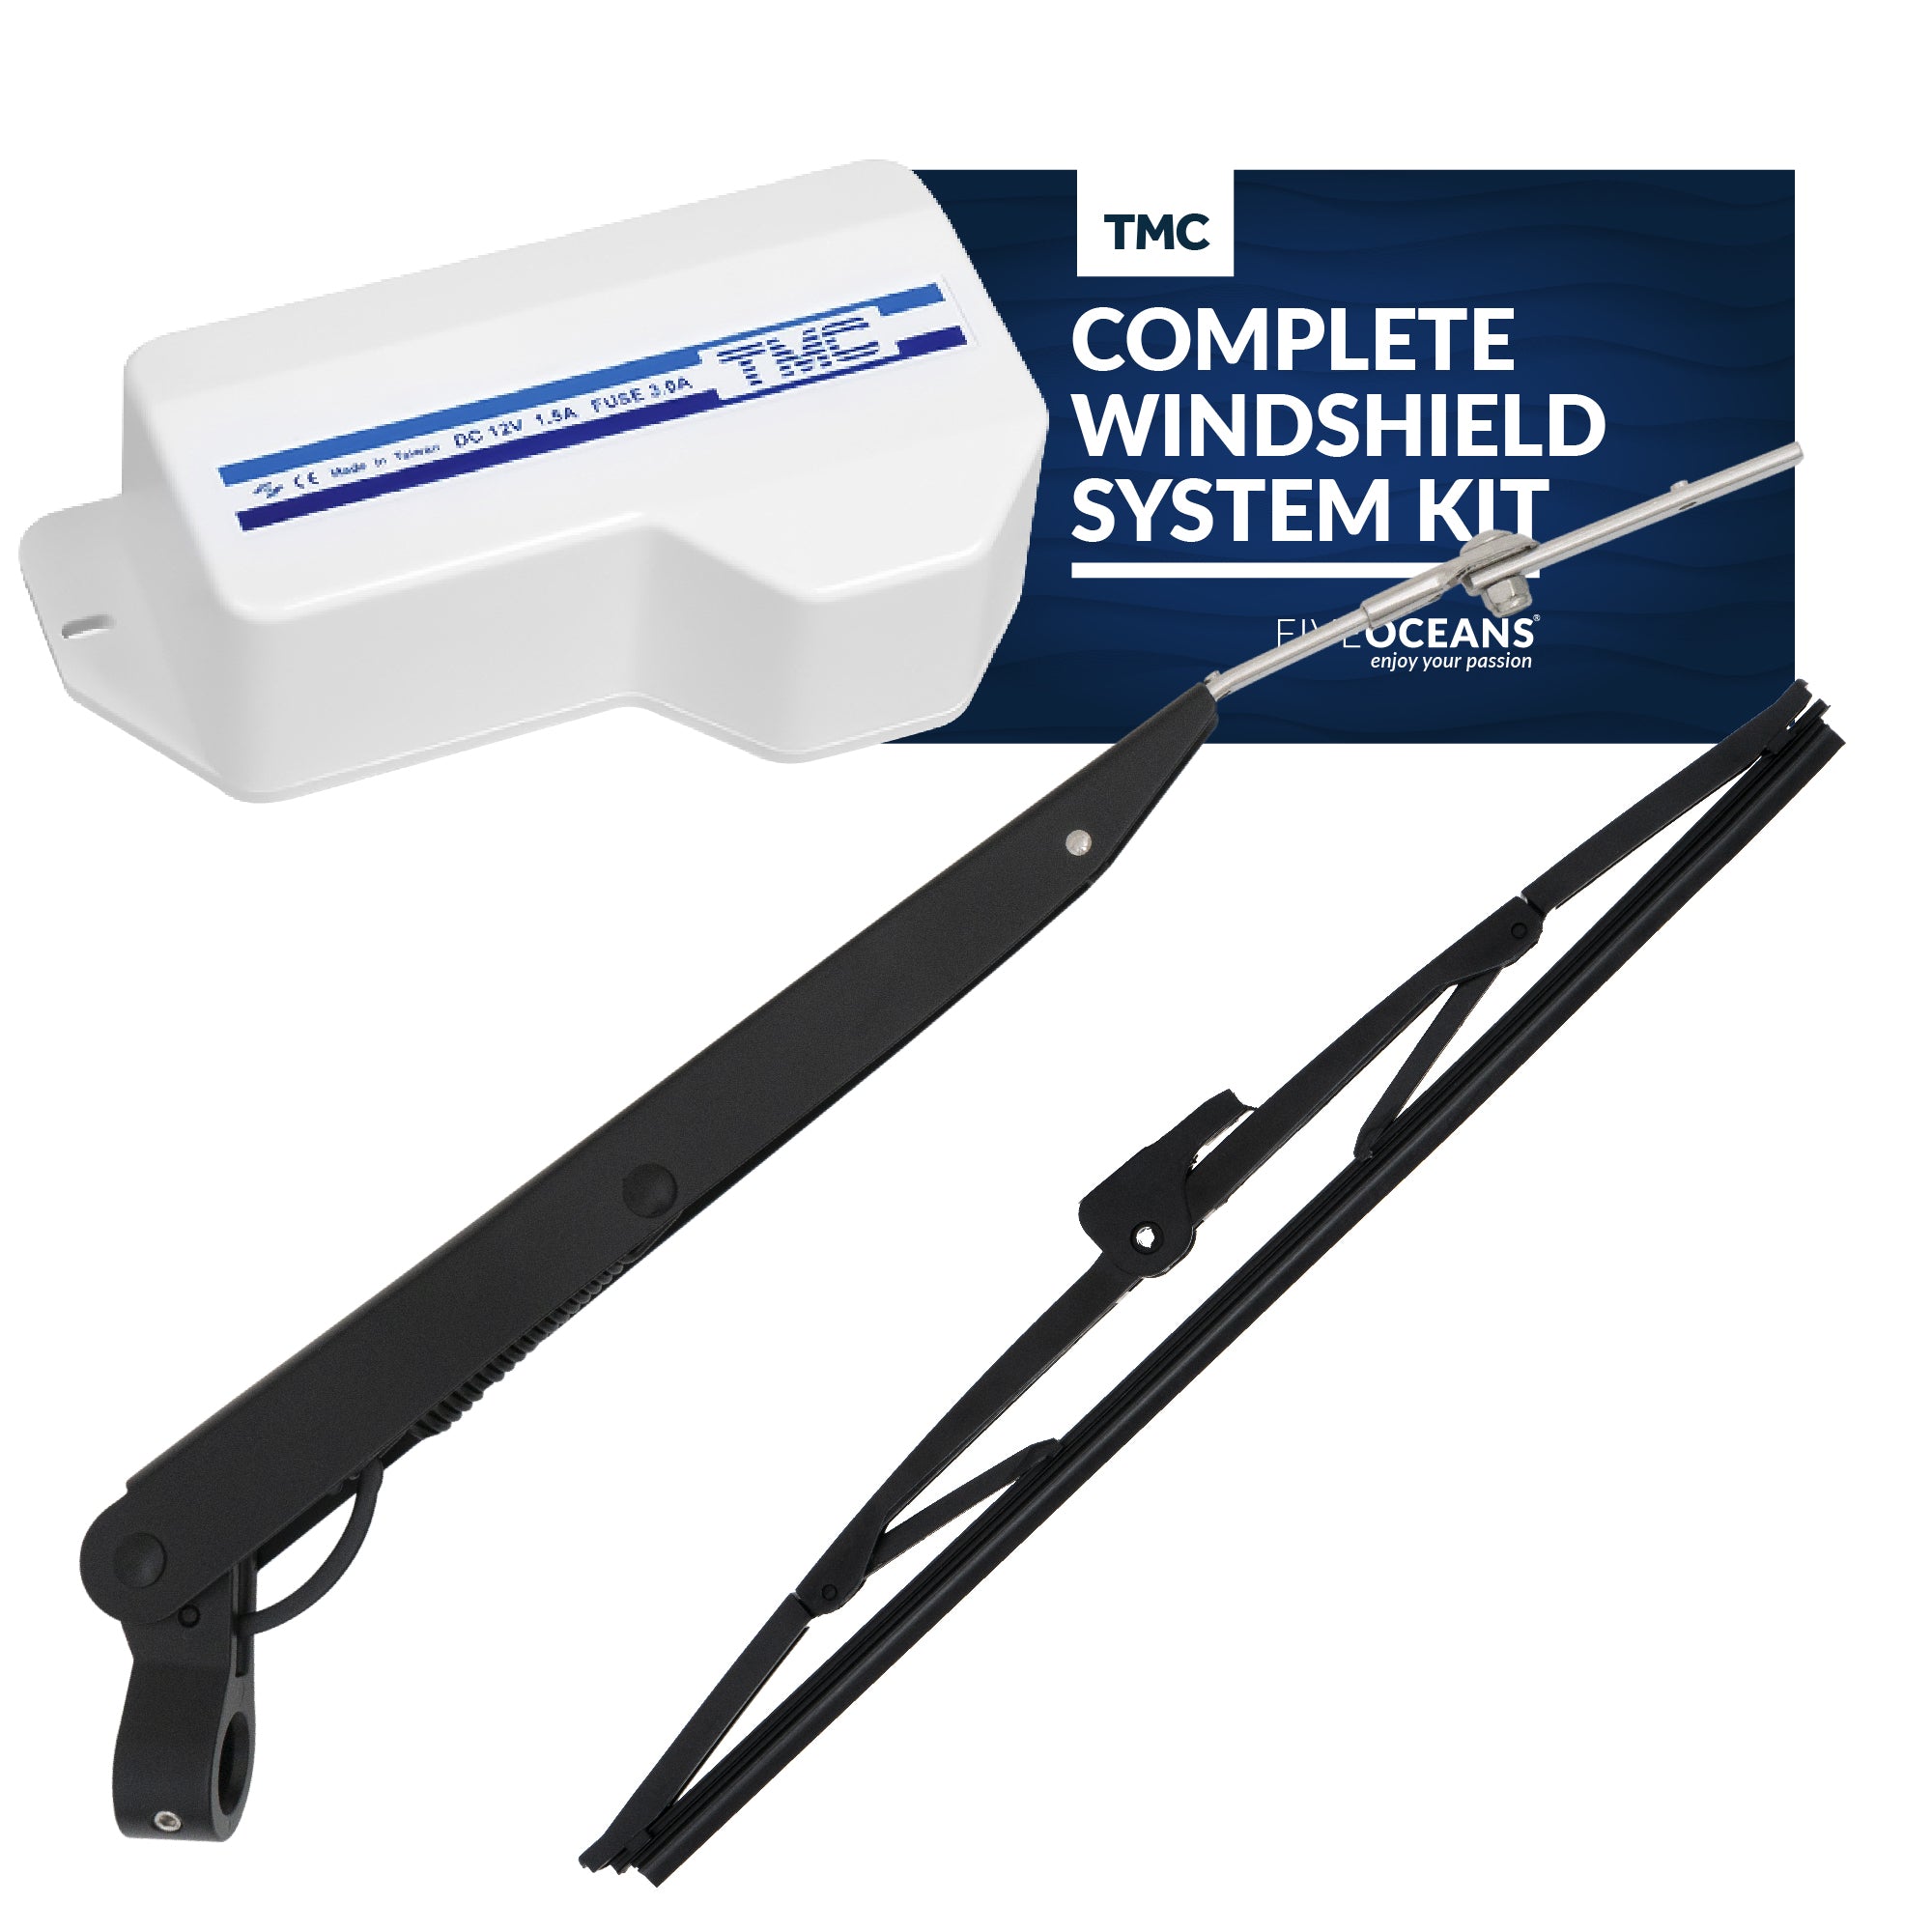 TMC Complete Windshield System Kit  - FO746-C1